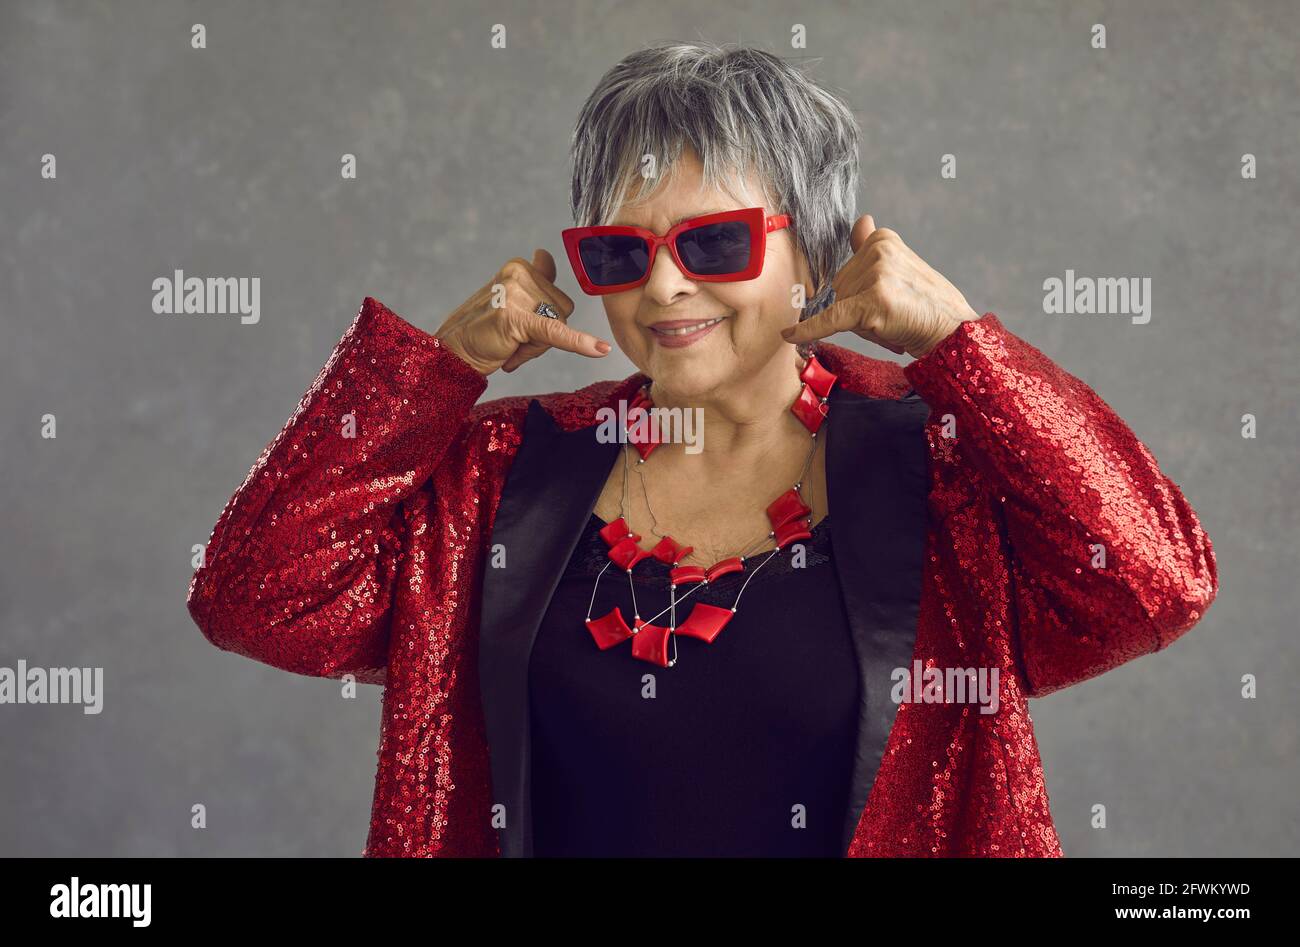 Headshot studio portrait of trendy fashion old woman showing call me gesture Stock Photo